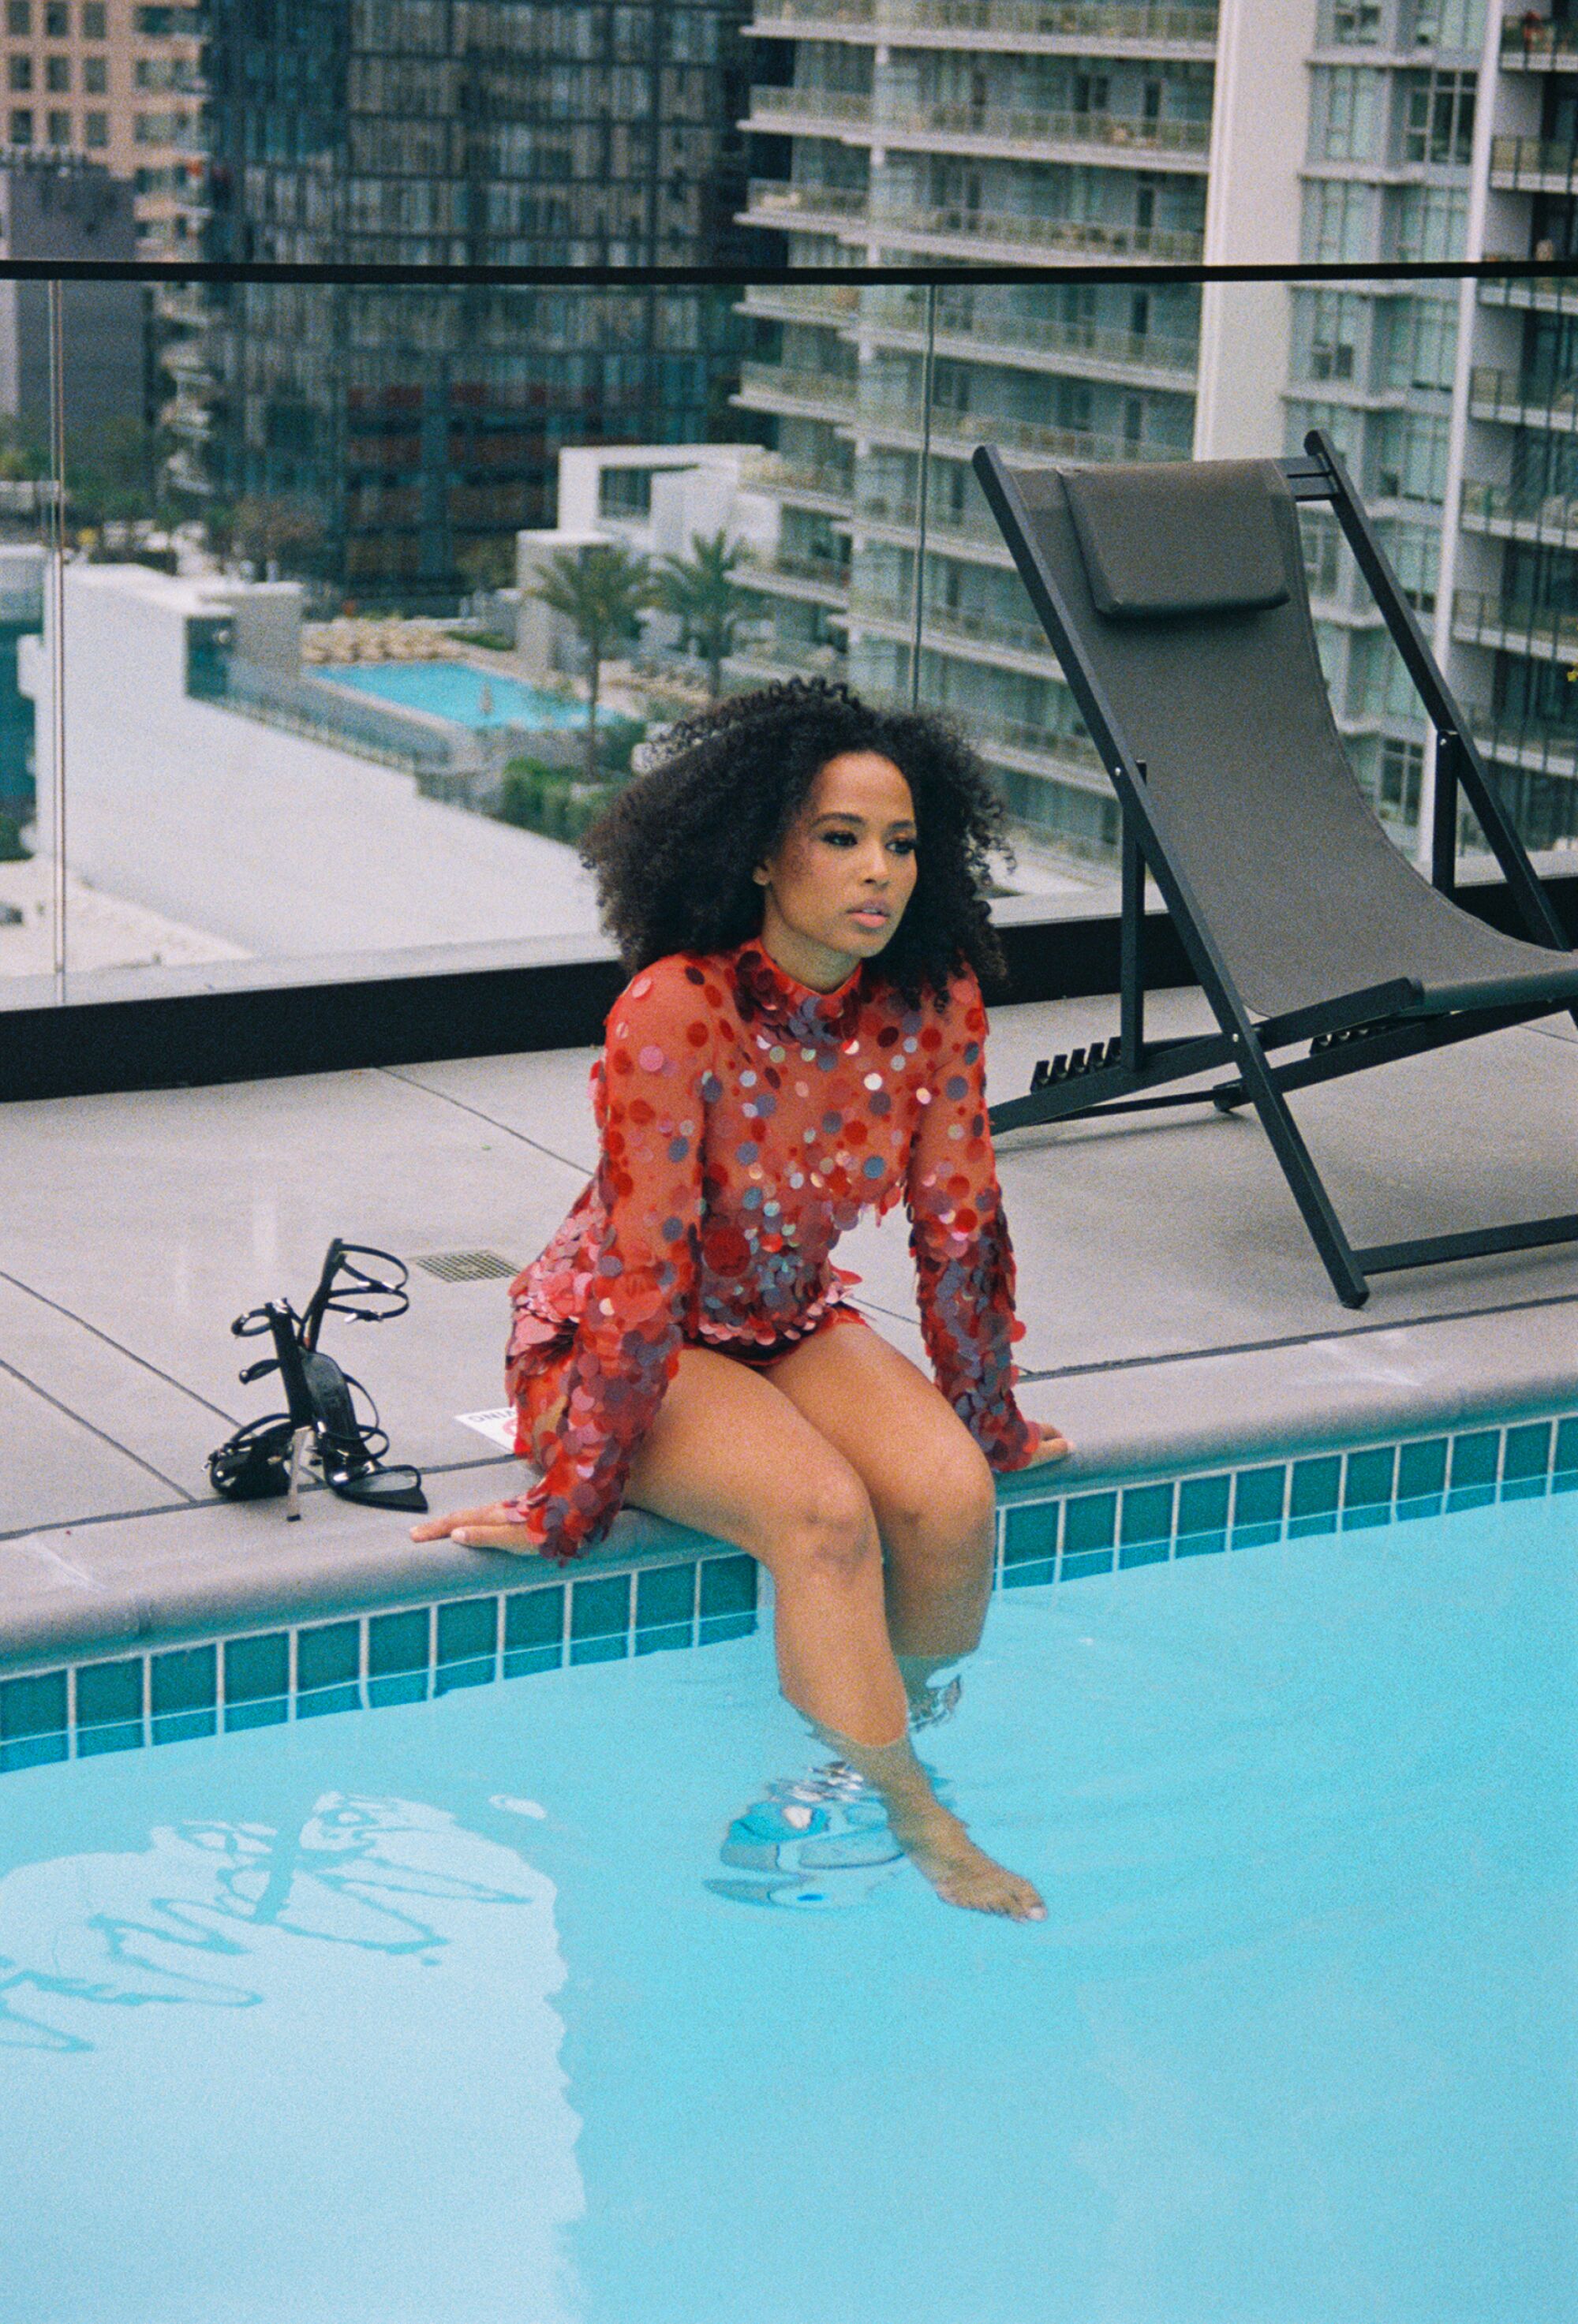 A woman in a red sequined dress sits on the edge of a pool with her feet in the water.